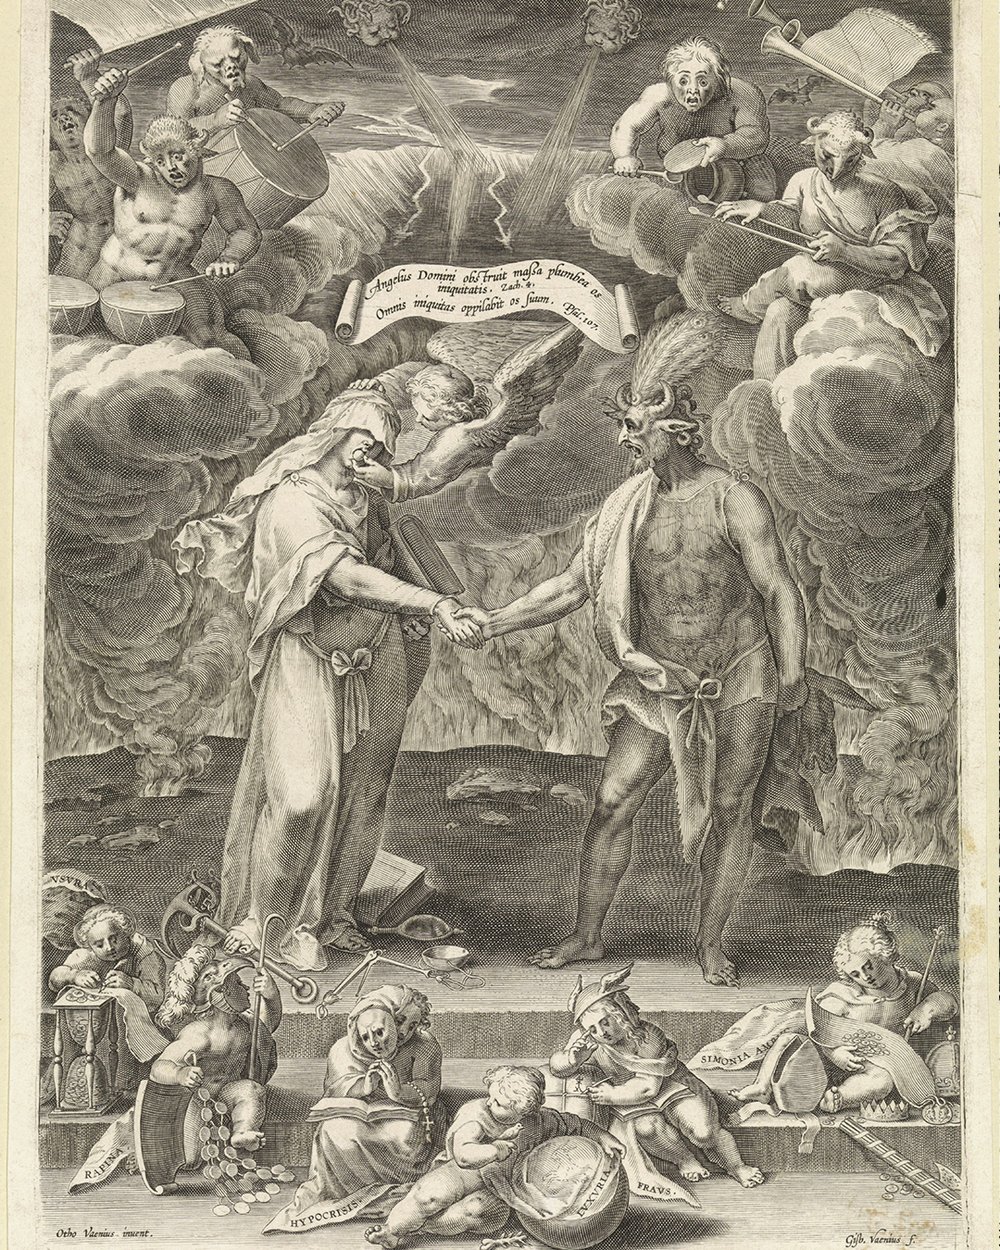 "Marriage between evil and the devil" (1572 - 1628)